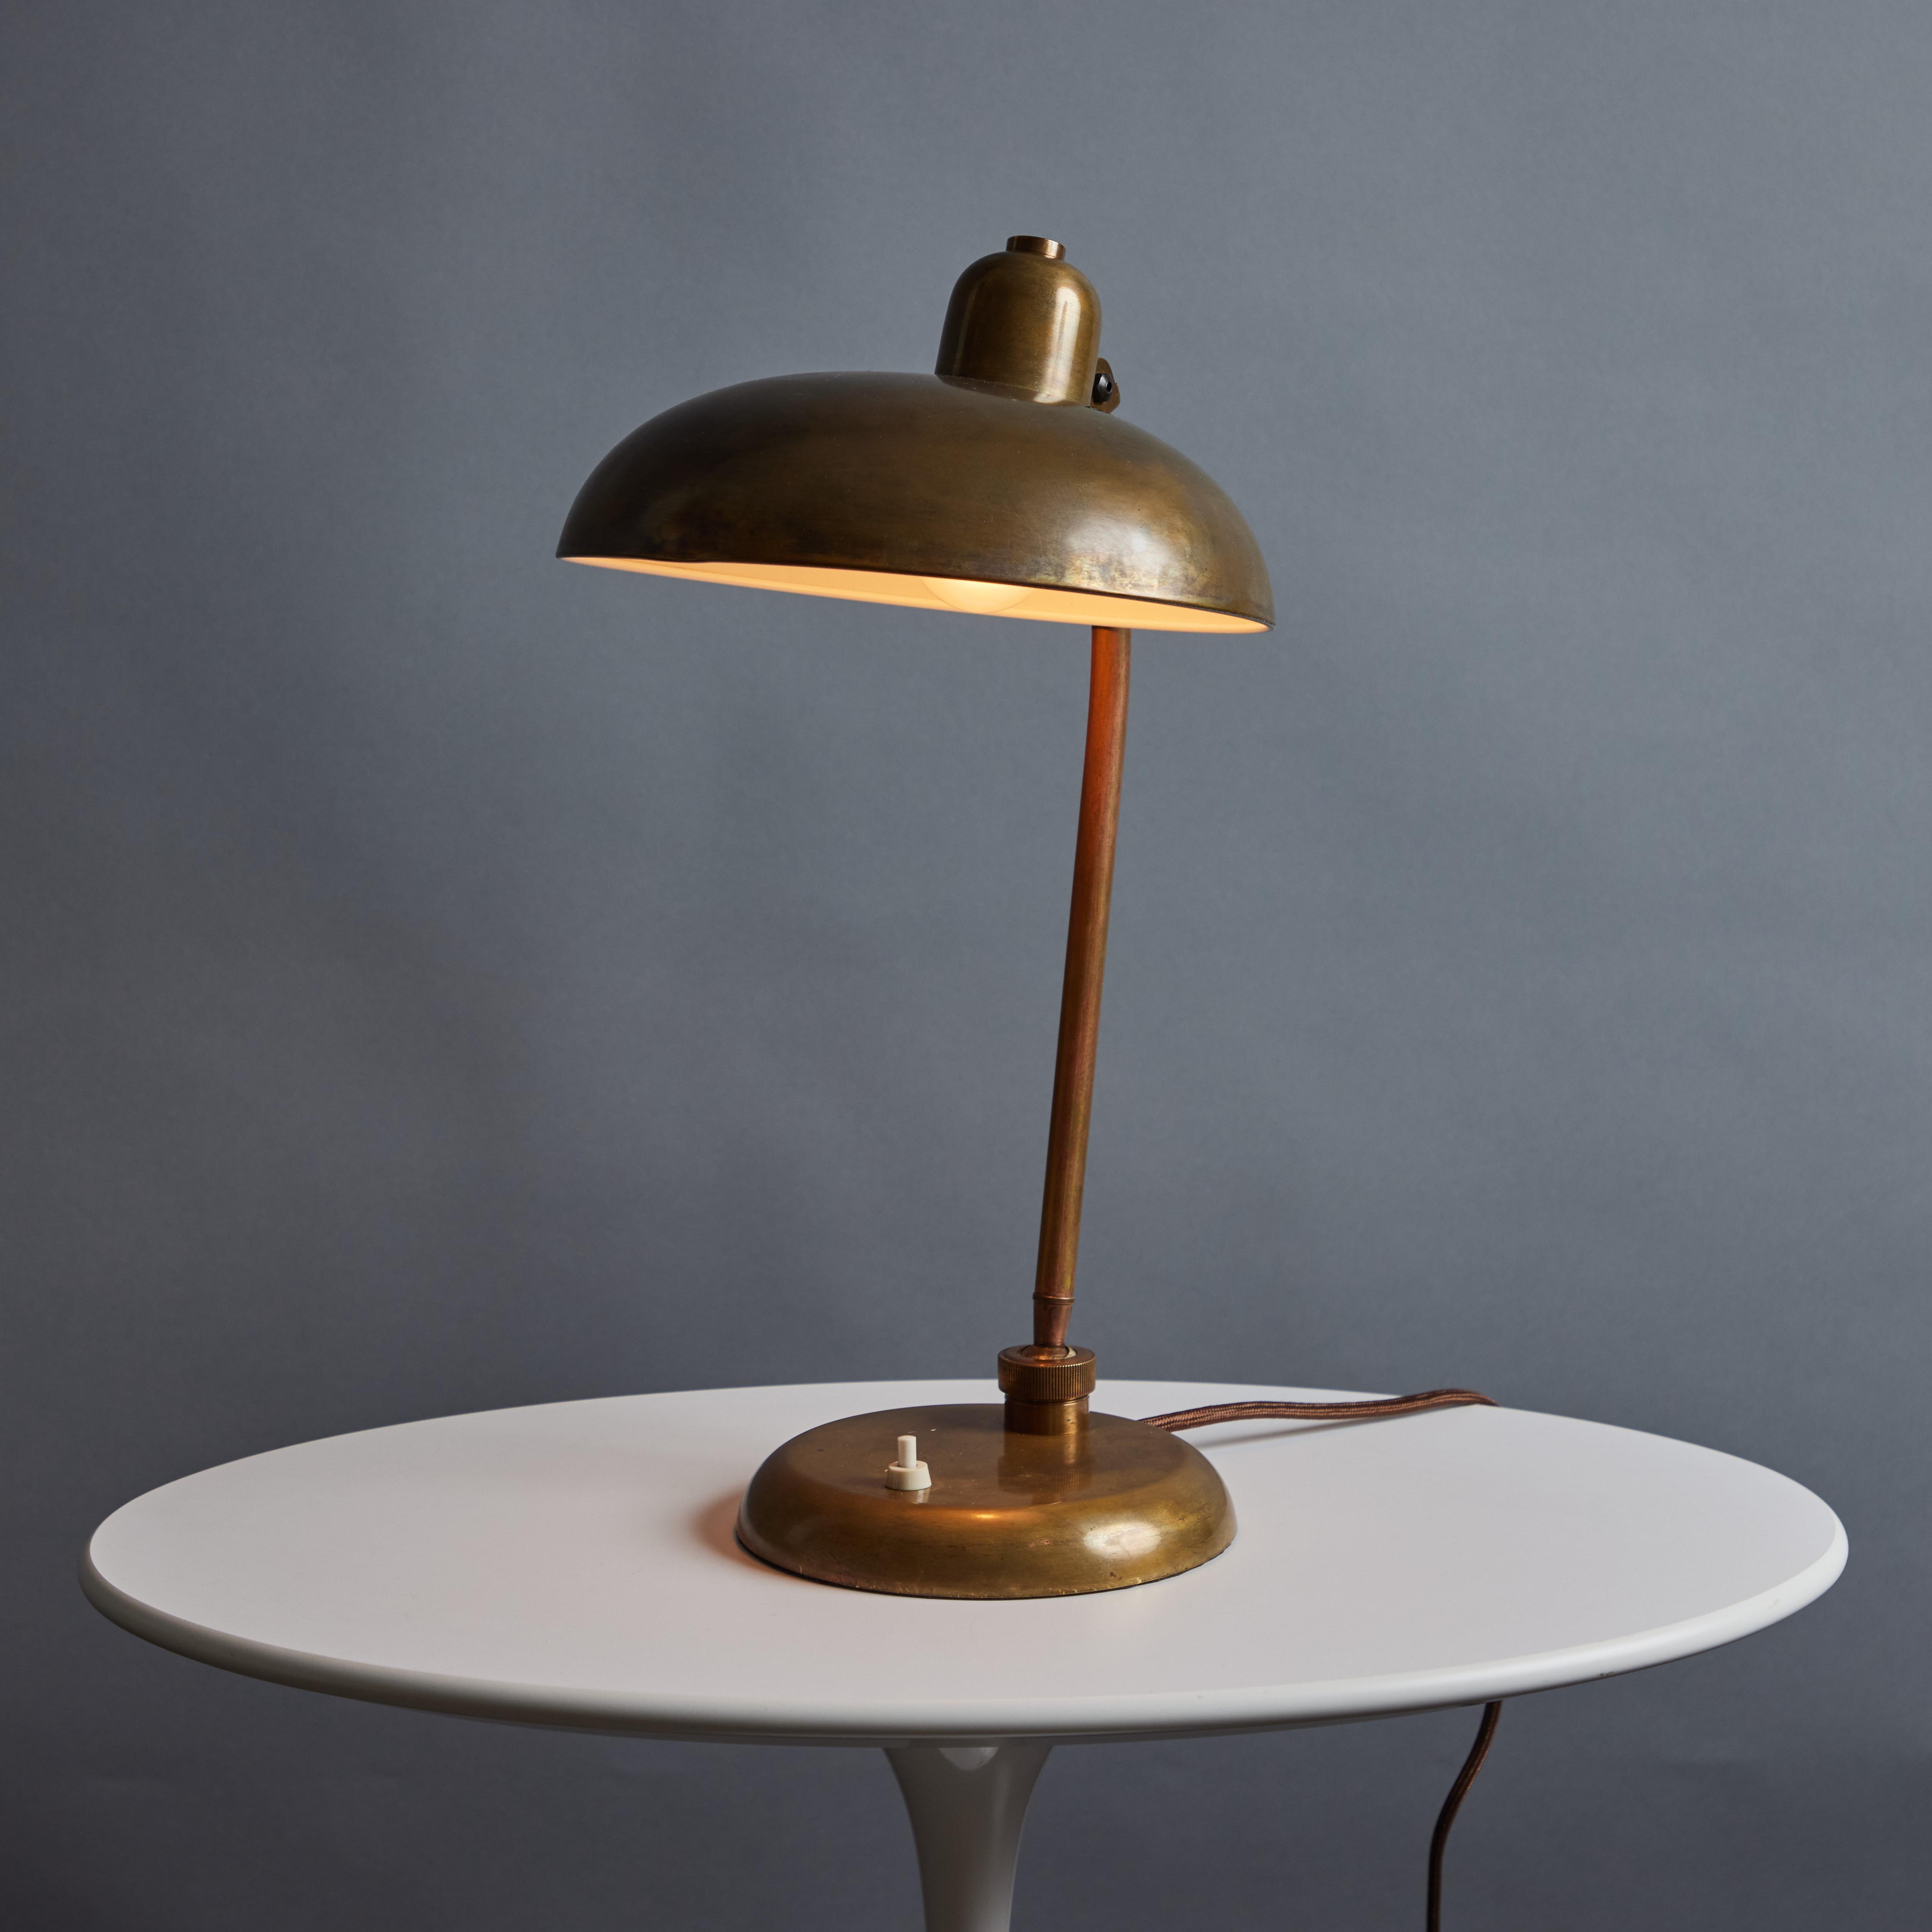 1940s Giovanni Michelucci brass ministerial table lamp for Lariolux. Produced circa 1940 and executed in richly patinated brass with swiveling arm and rotating adjustable shade. Reminiscent of the early designs of Kaiser Idell. An elegant table lamp